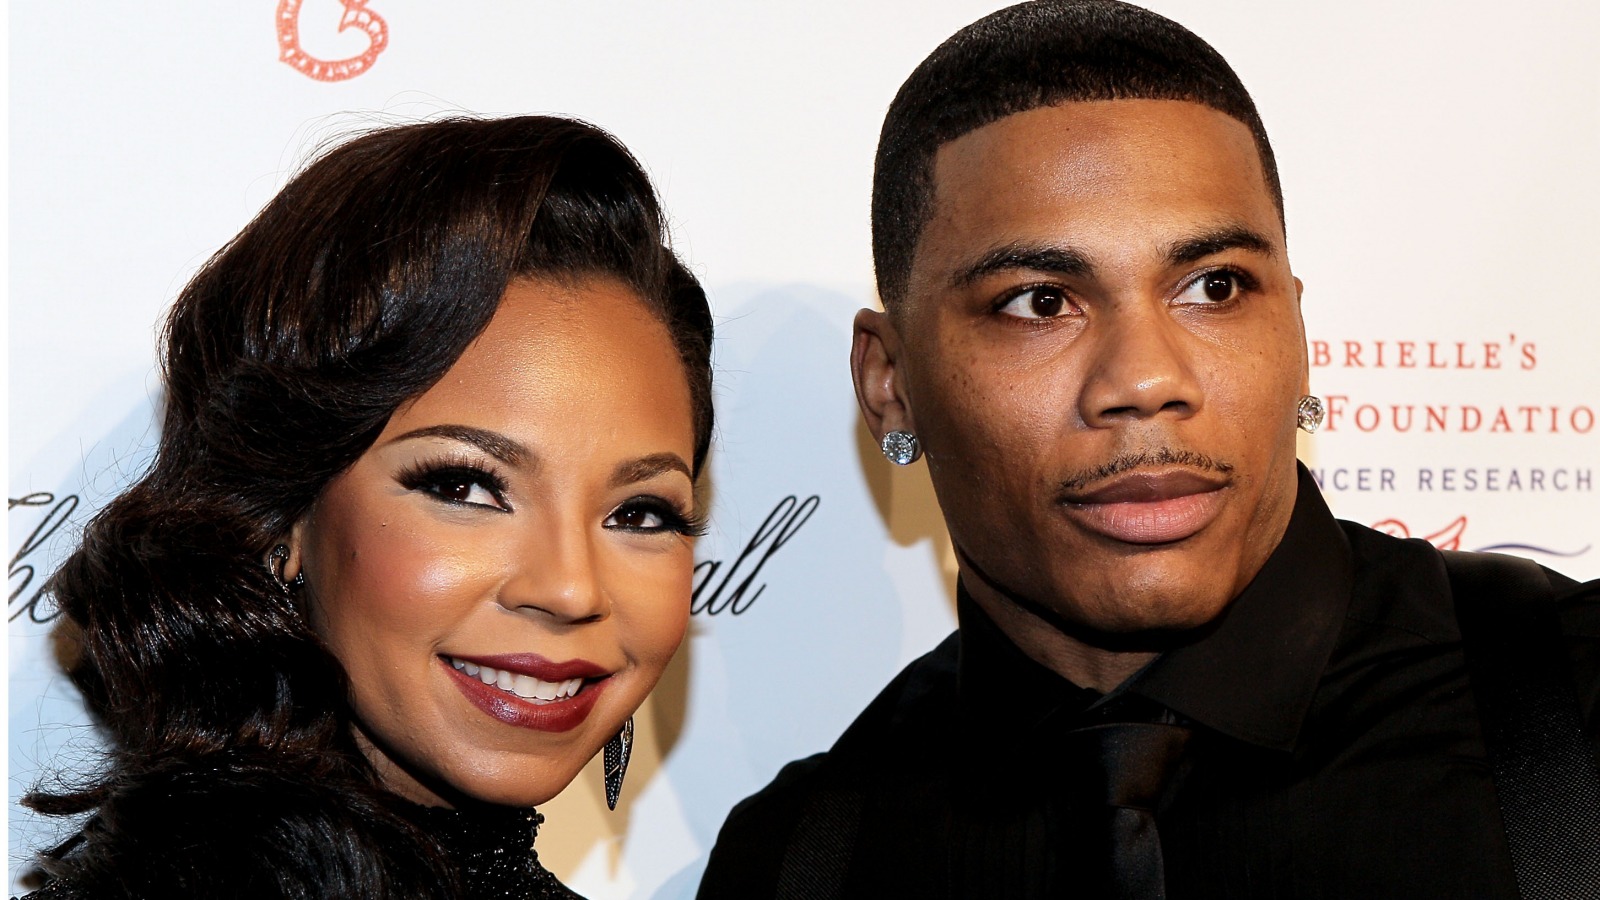 For nearly a decade, Ashanti and Nelly were a musical power couple. 